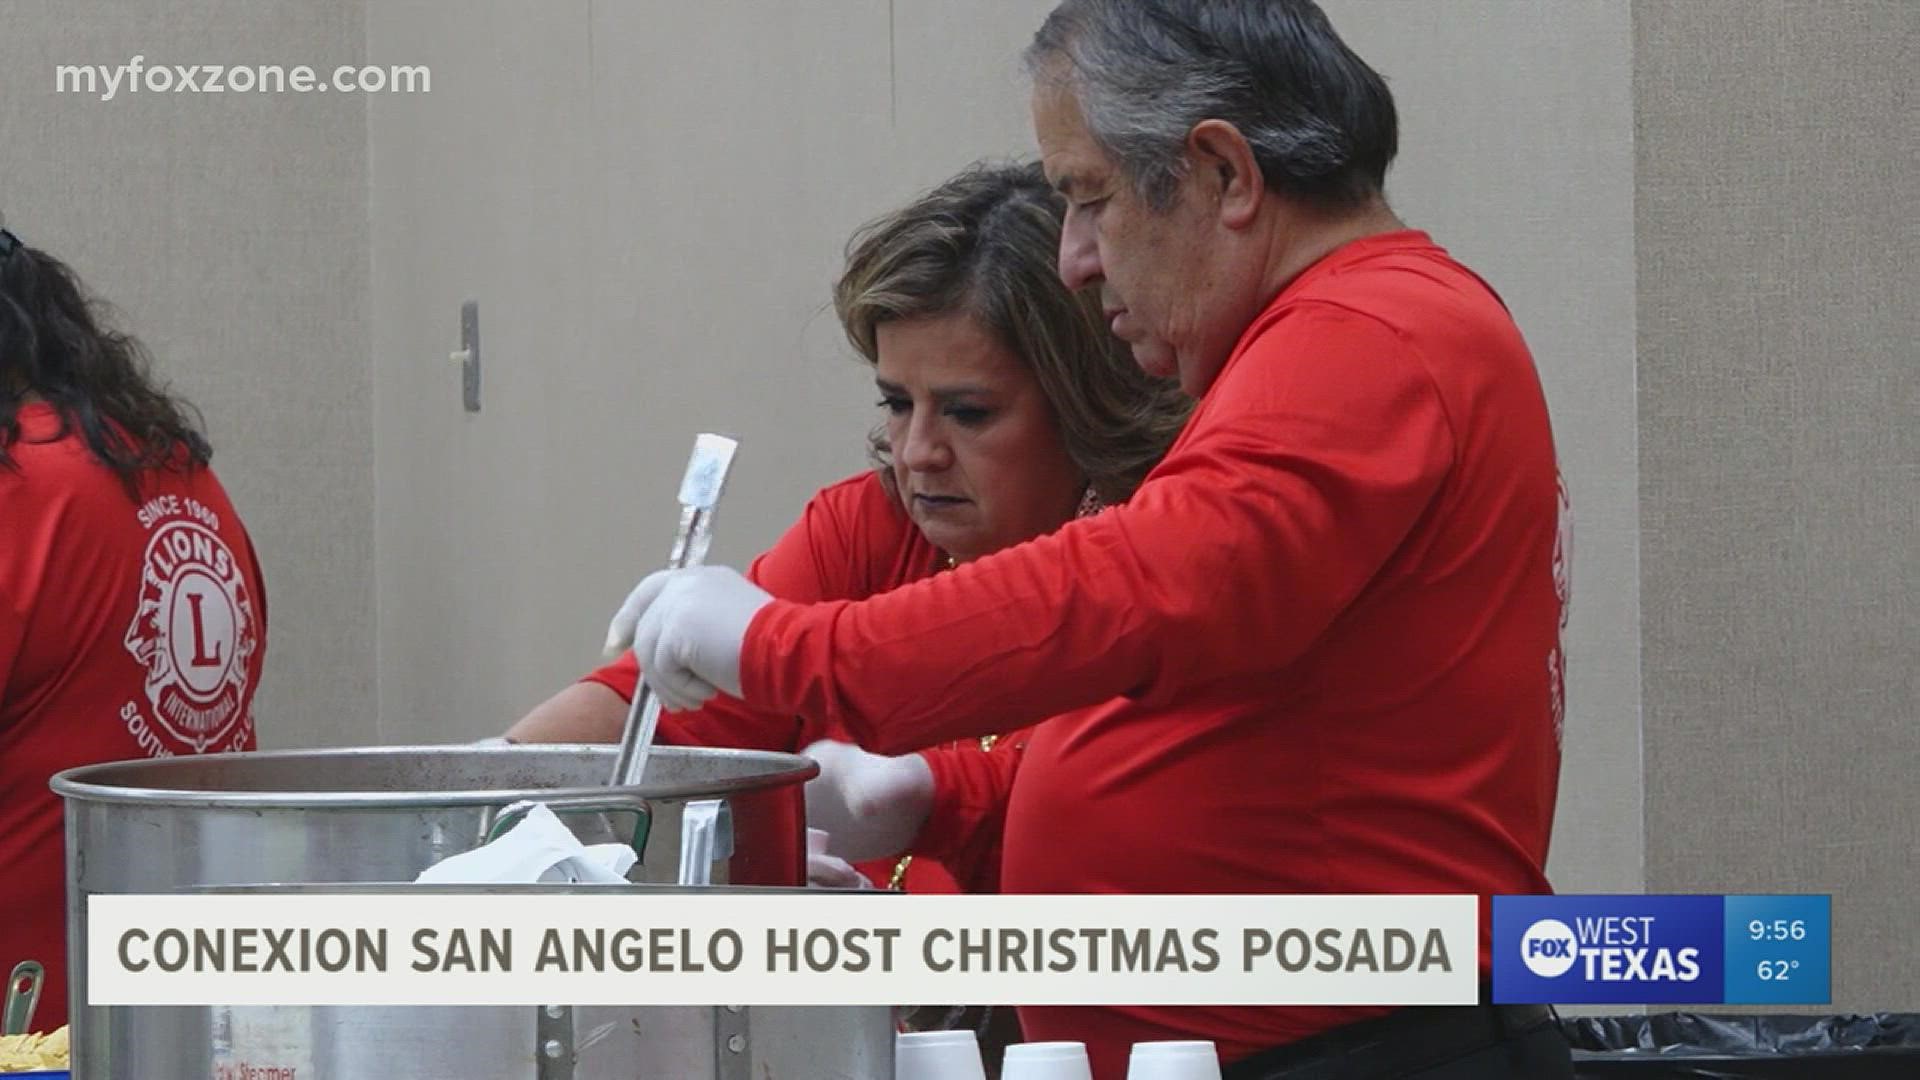 Conexion San Angelo hosts its 19th annual Christmas posada at the McNease Convention Center.